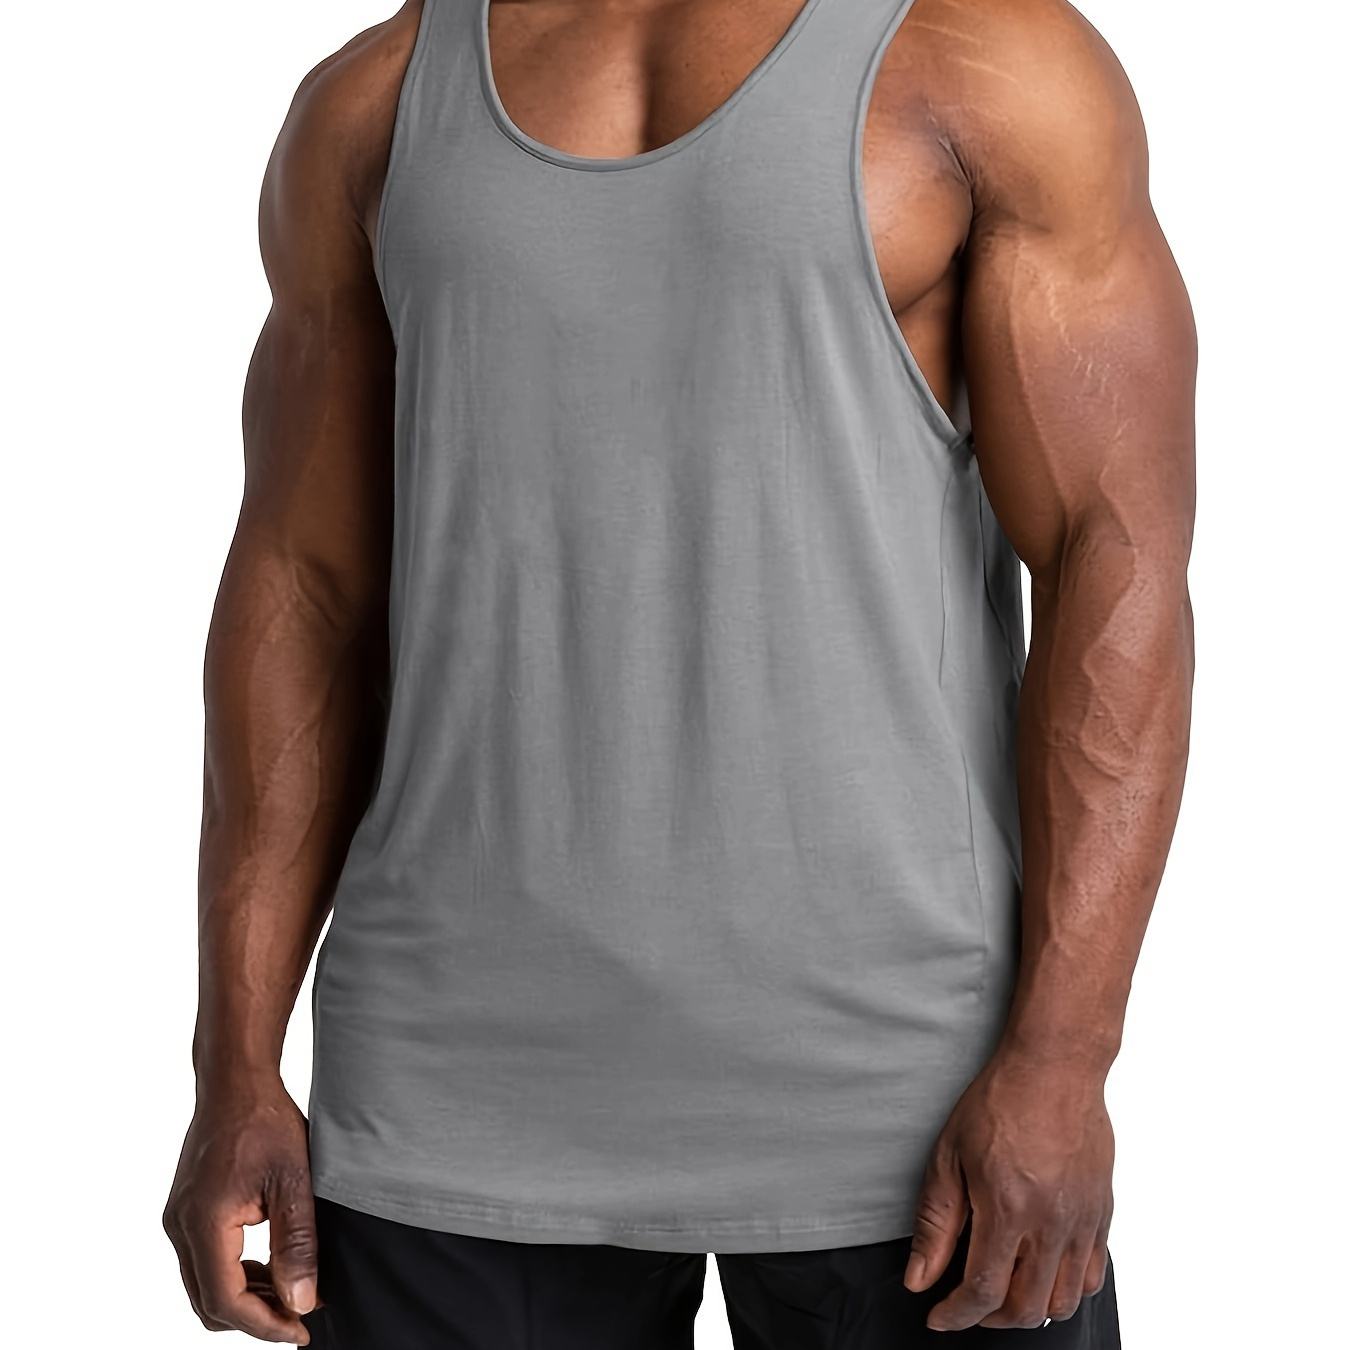 

Summer Men's Quick Dry Moisture-wicking Breathable Tank Tops, Athletic Gym Bodybuilding Sports Sleeveless Shirts, For Running Training, Men's Clothing